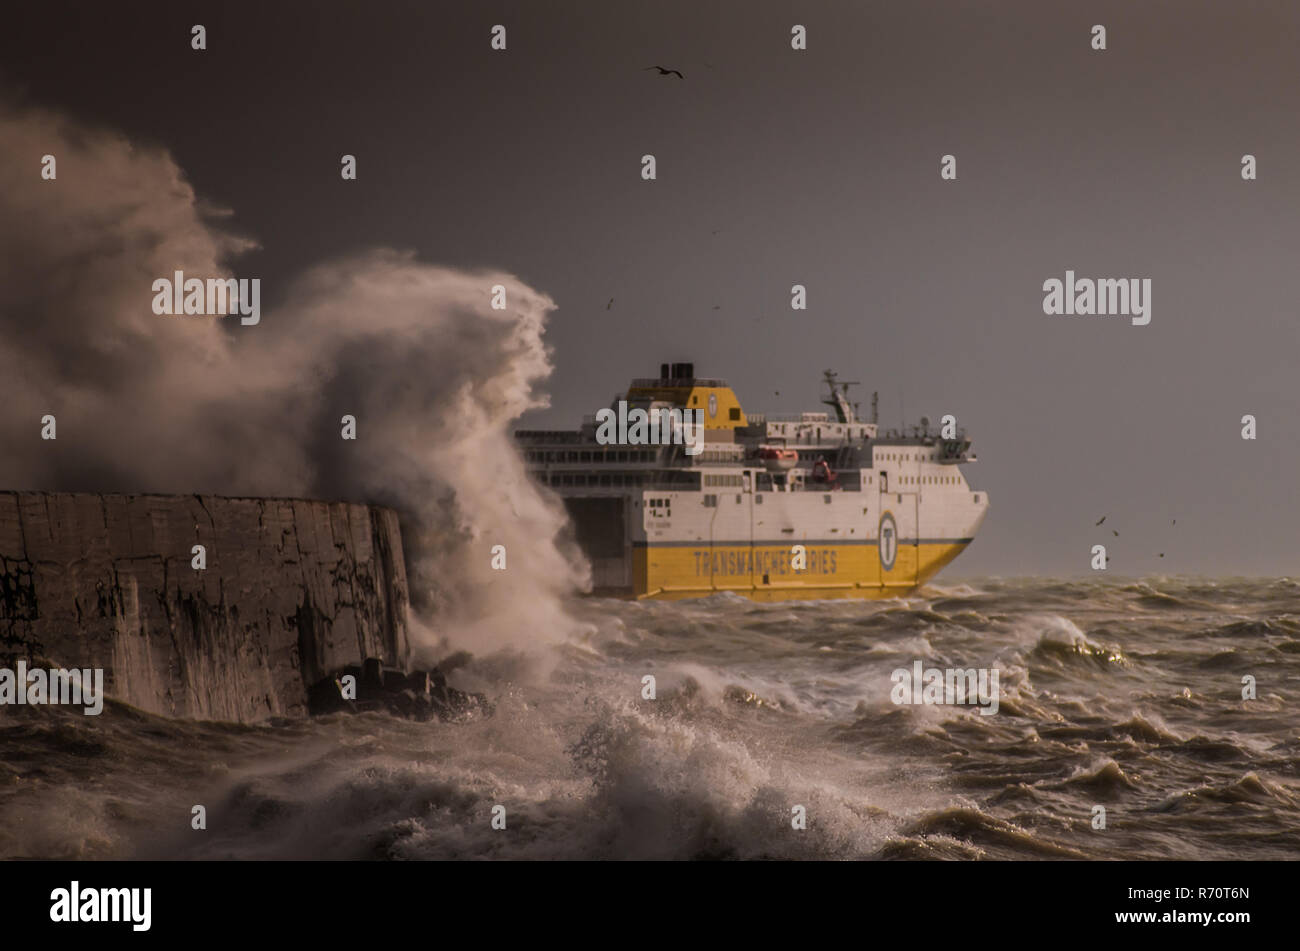 Newhaven, East Sussex, UK. 7 December 2018..Transmanche ferry to Dieppe departs  the Newhaven harbour wall protection into the rough windswept sea. Strong squally  wind from the West with heavy rain but still unseasonably warm at 10 C. Stock Photo